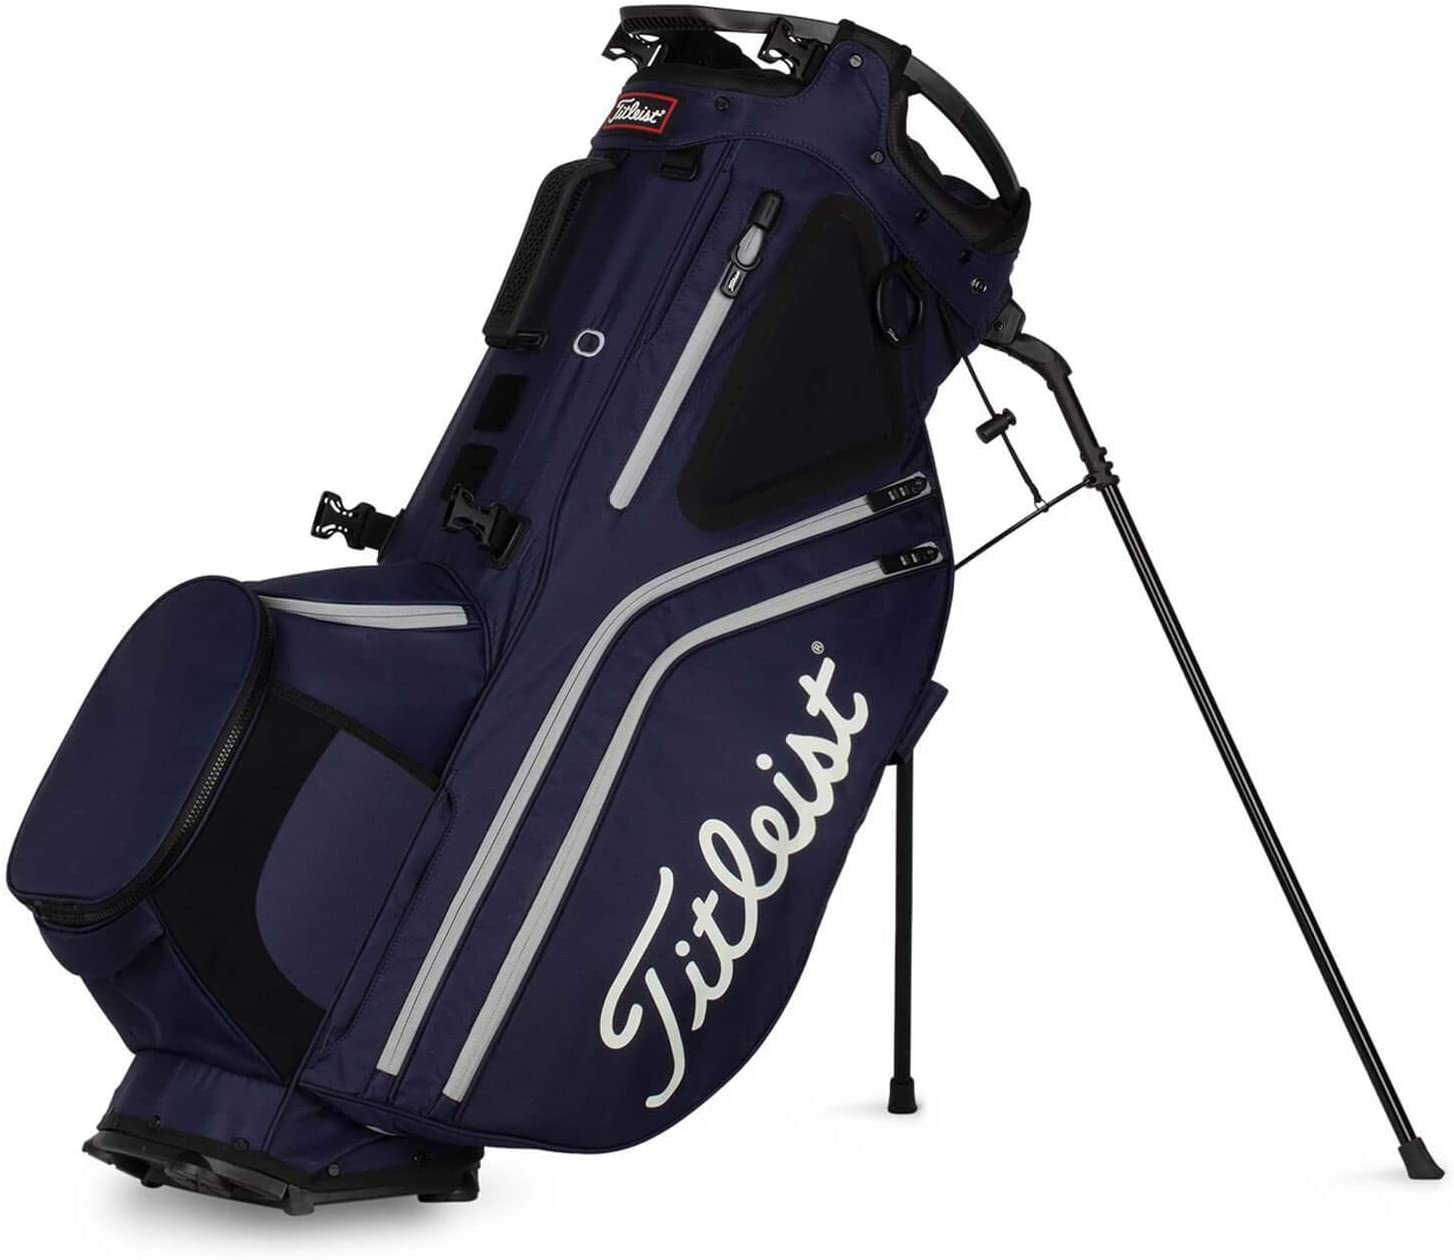 Best Hybrid Golf Bags 2022 To Walk Or Use A Cart The Ultimate